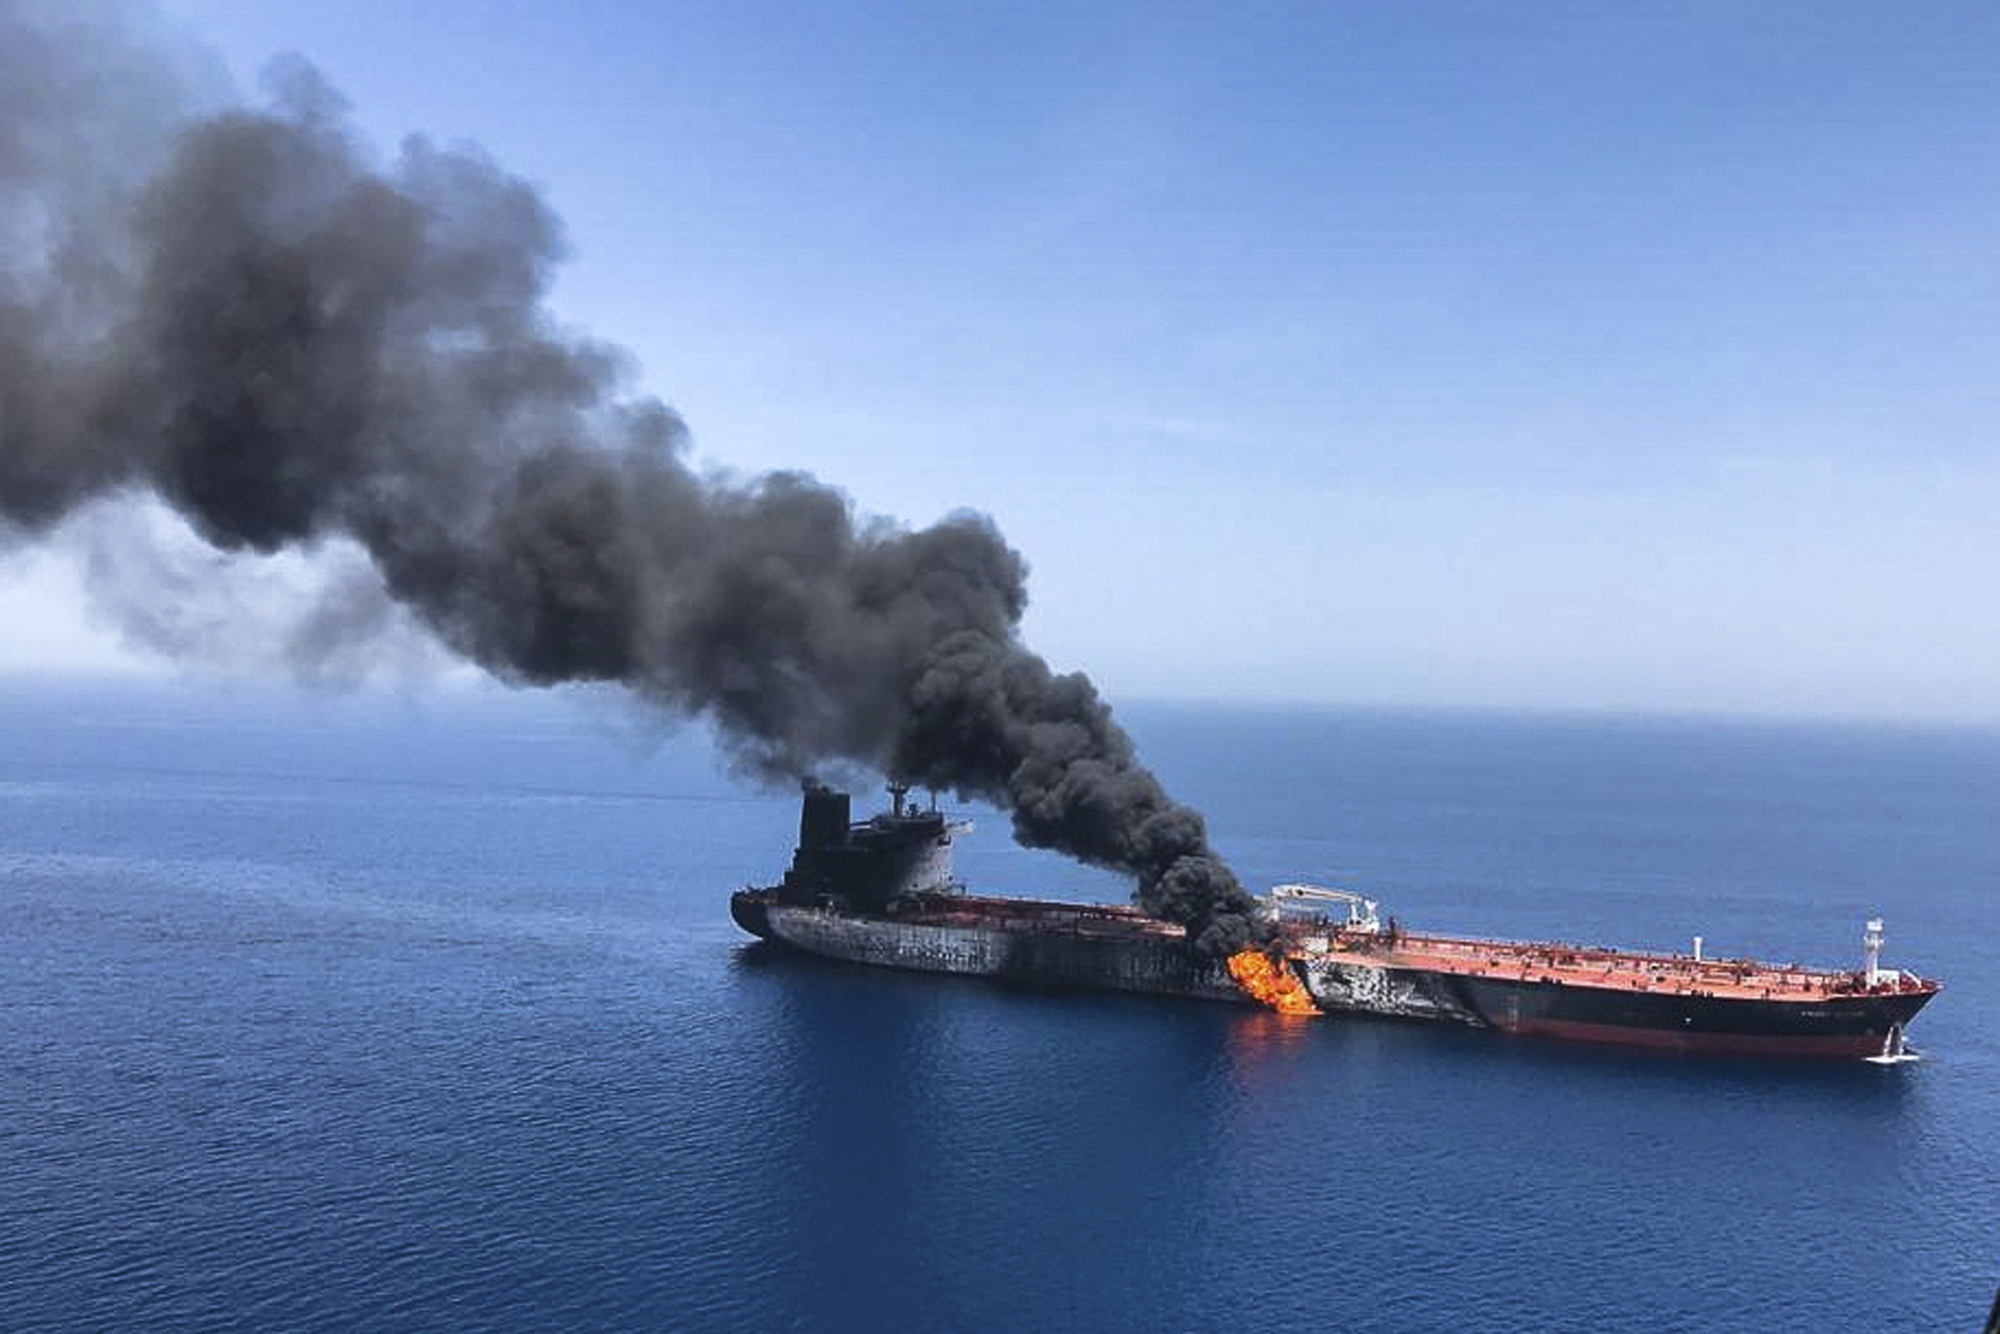 An oil tanker on fire in the sea of Oman last month